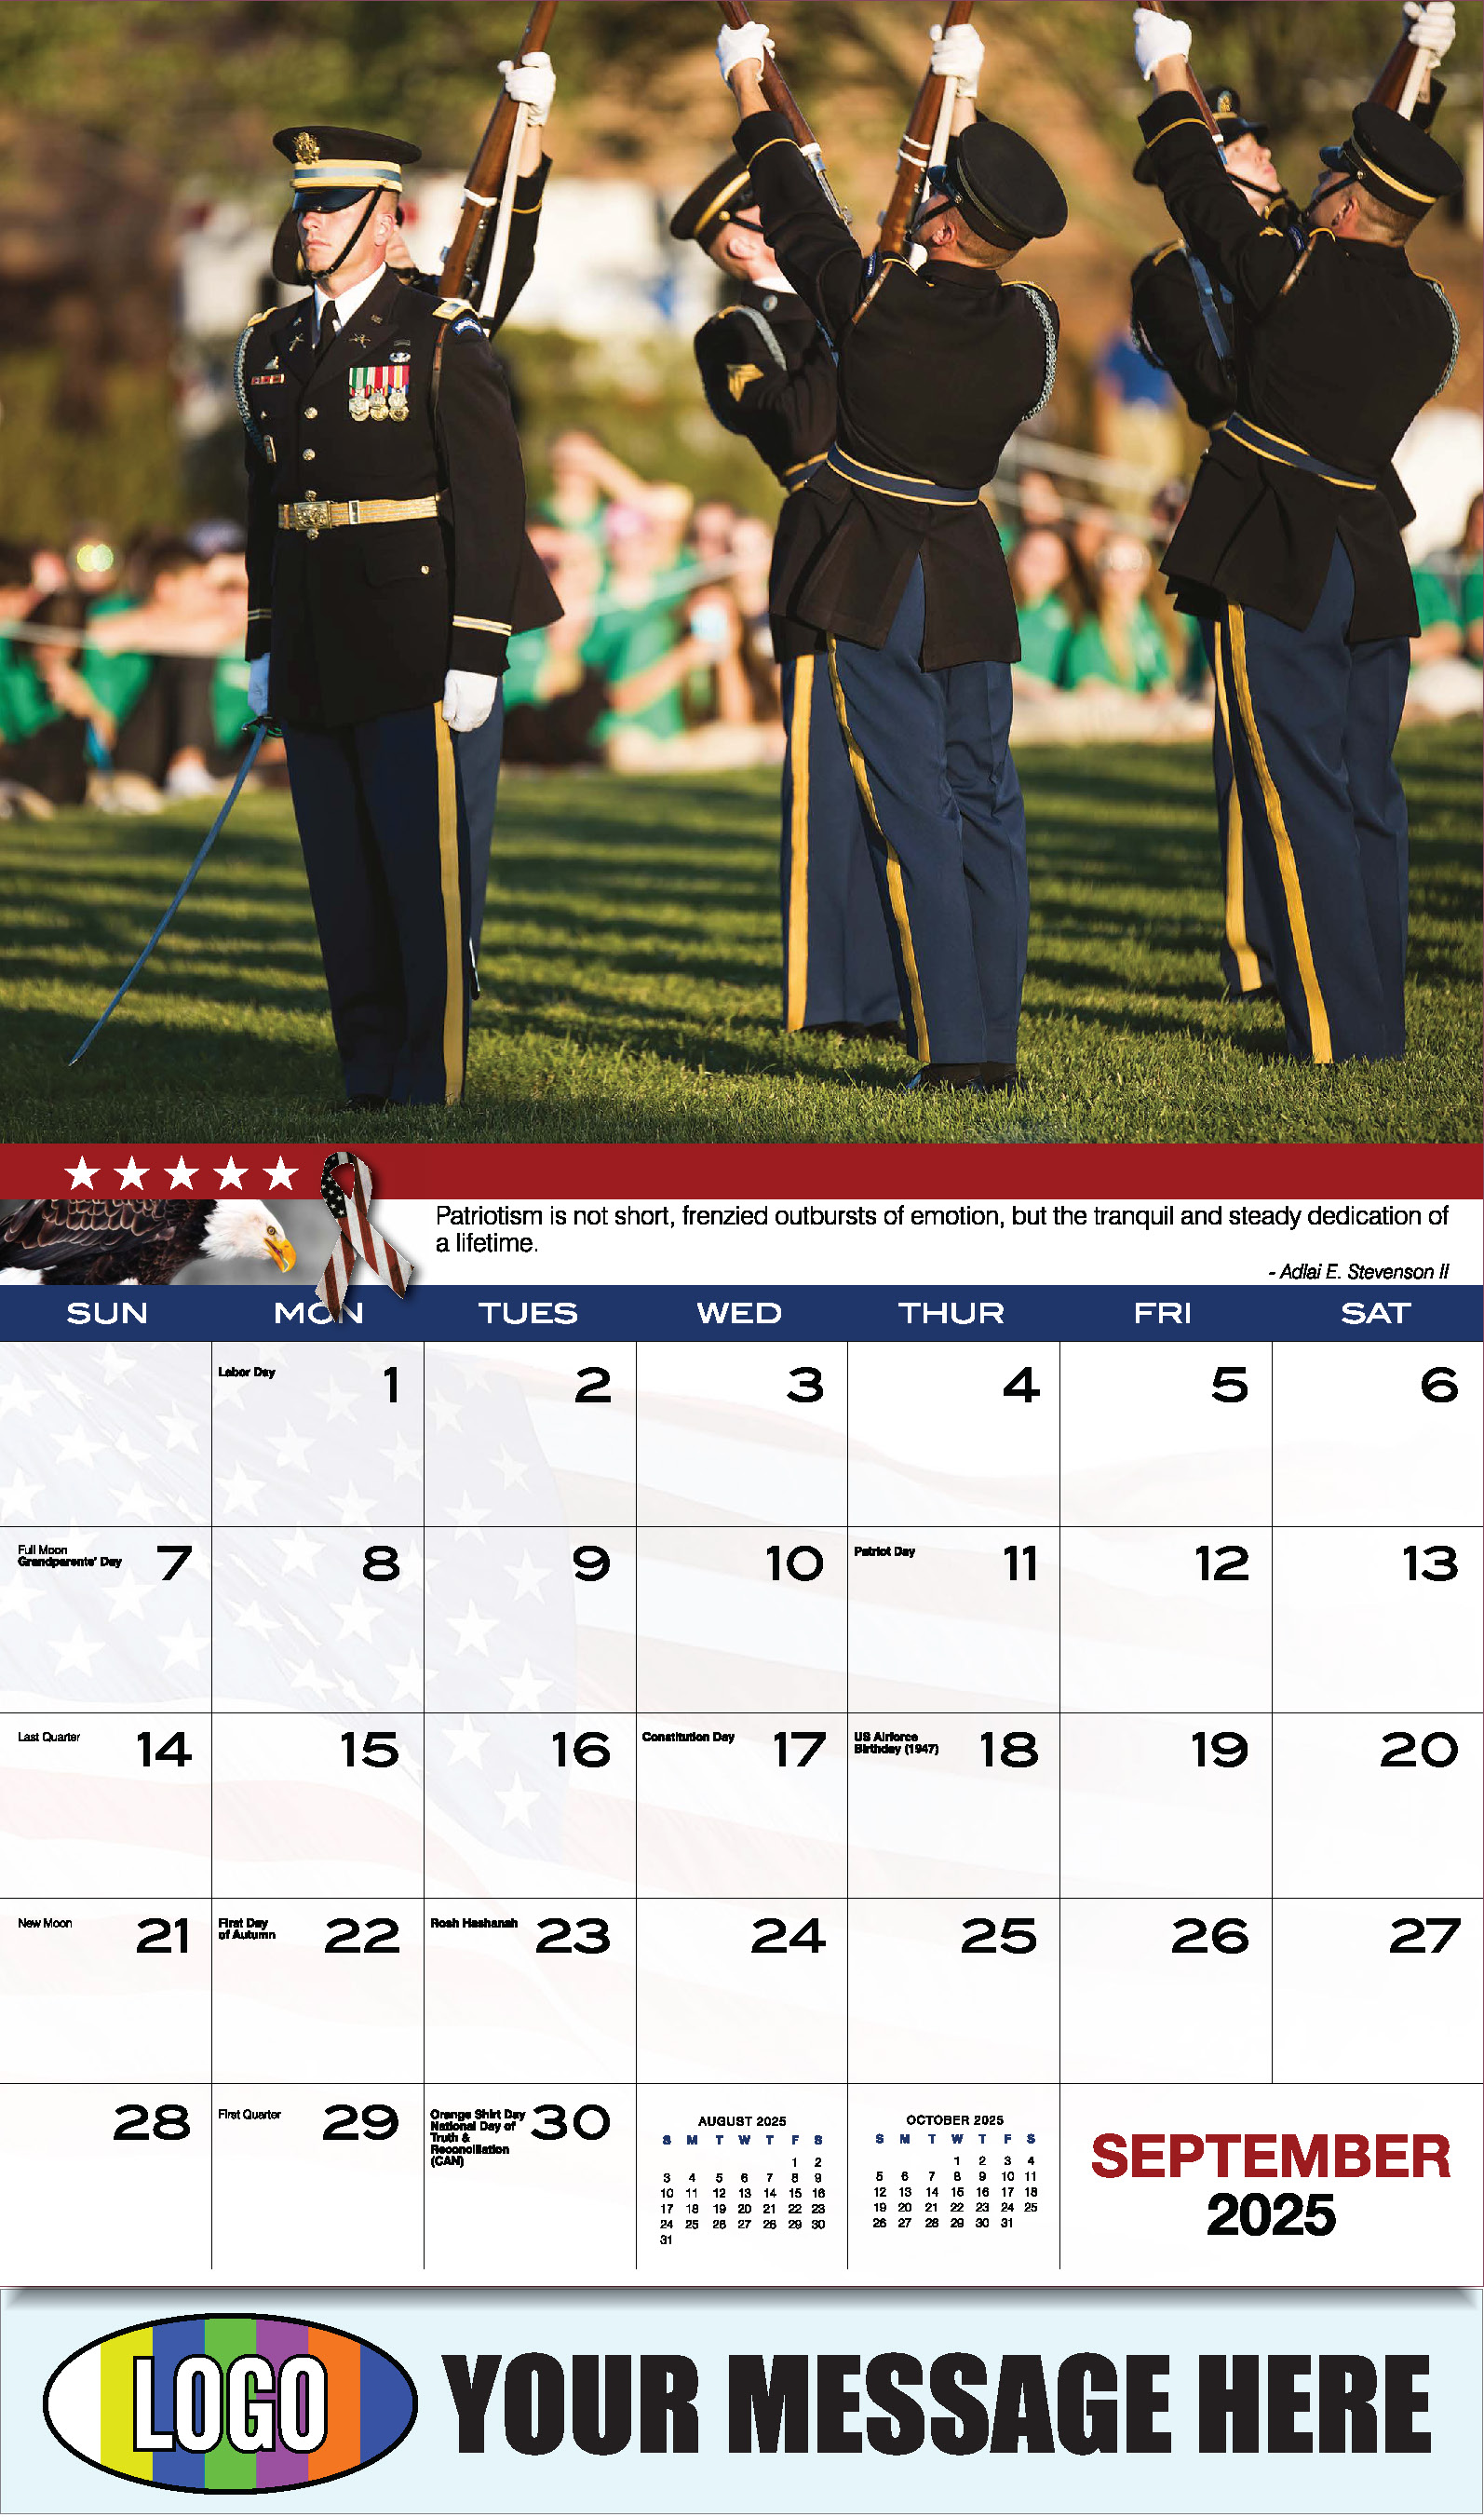 Home of the Brave 2025 USA Armed Forces Business Promo Calendar - September